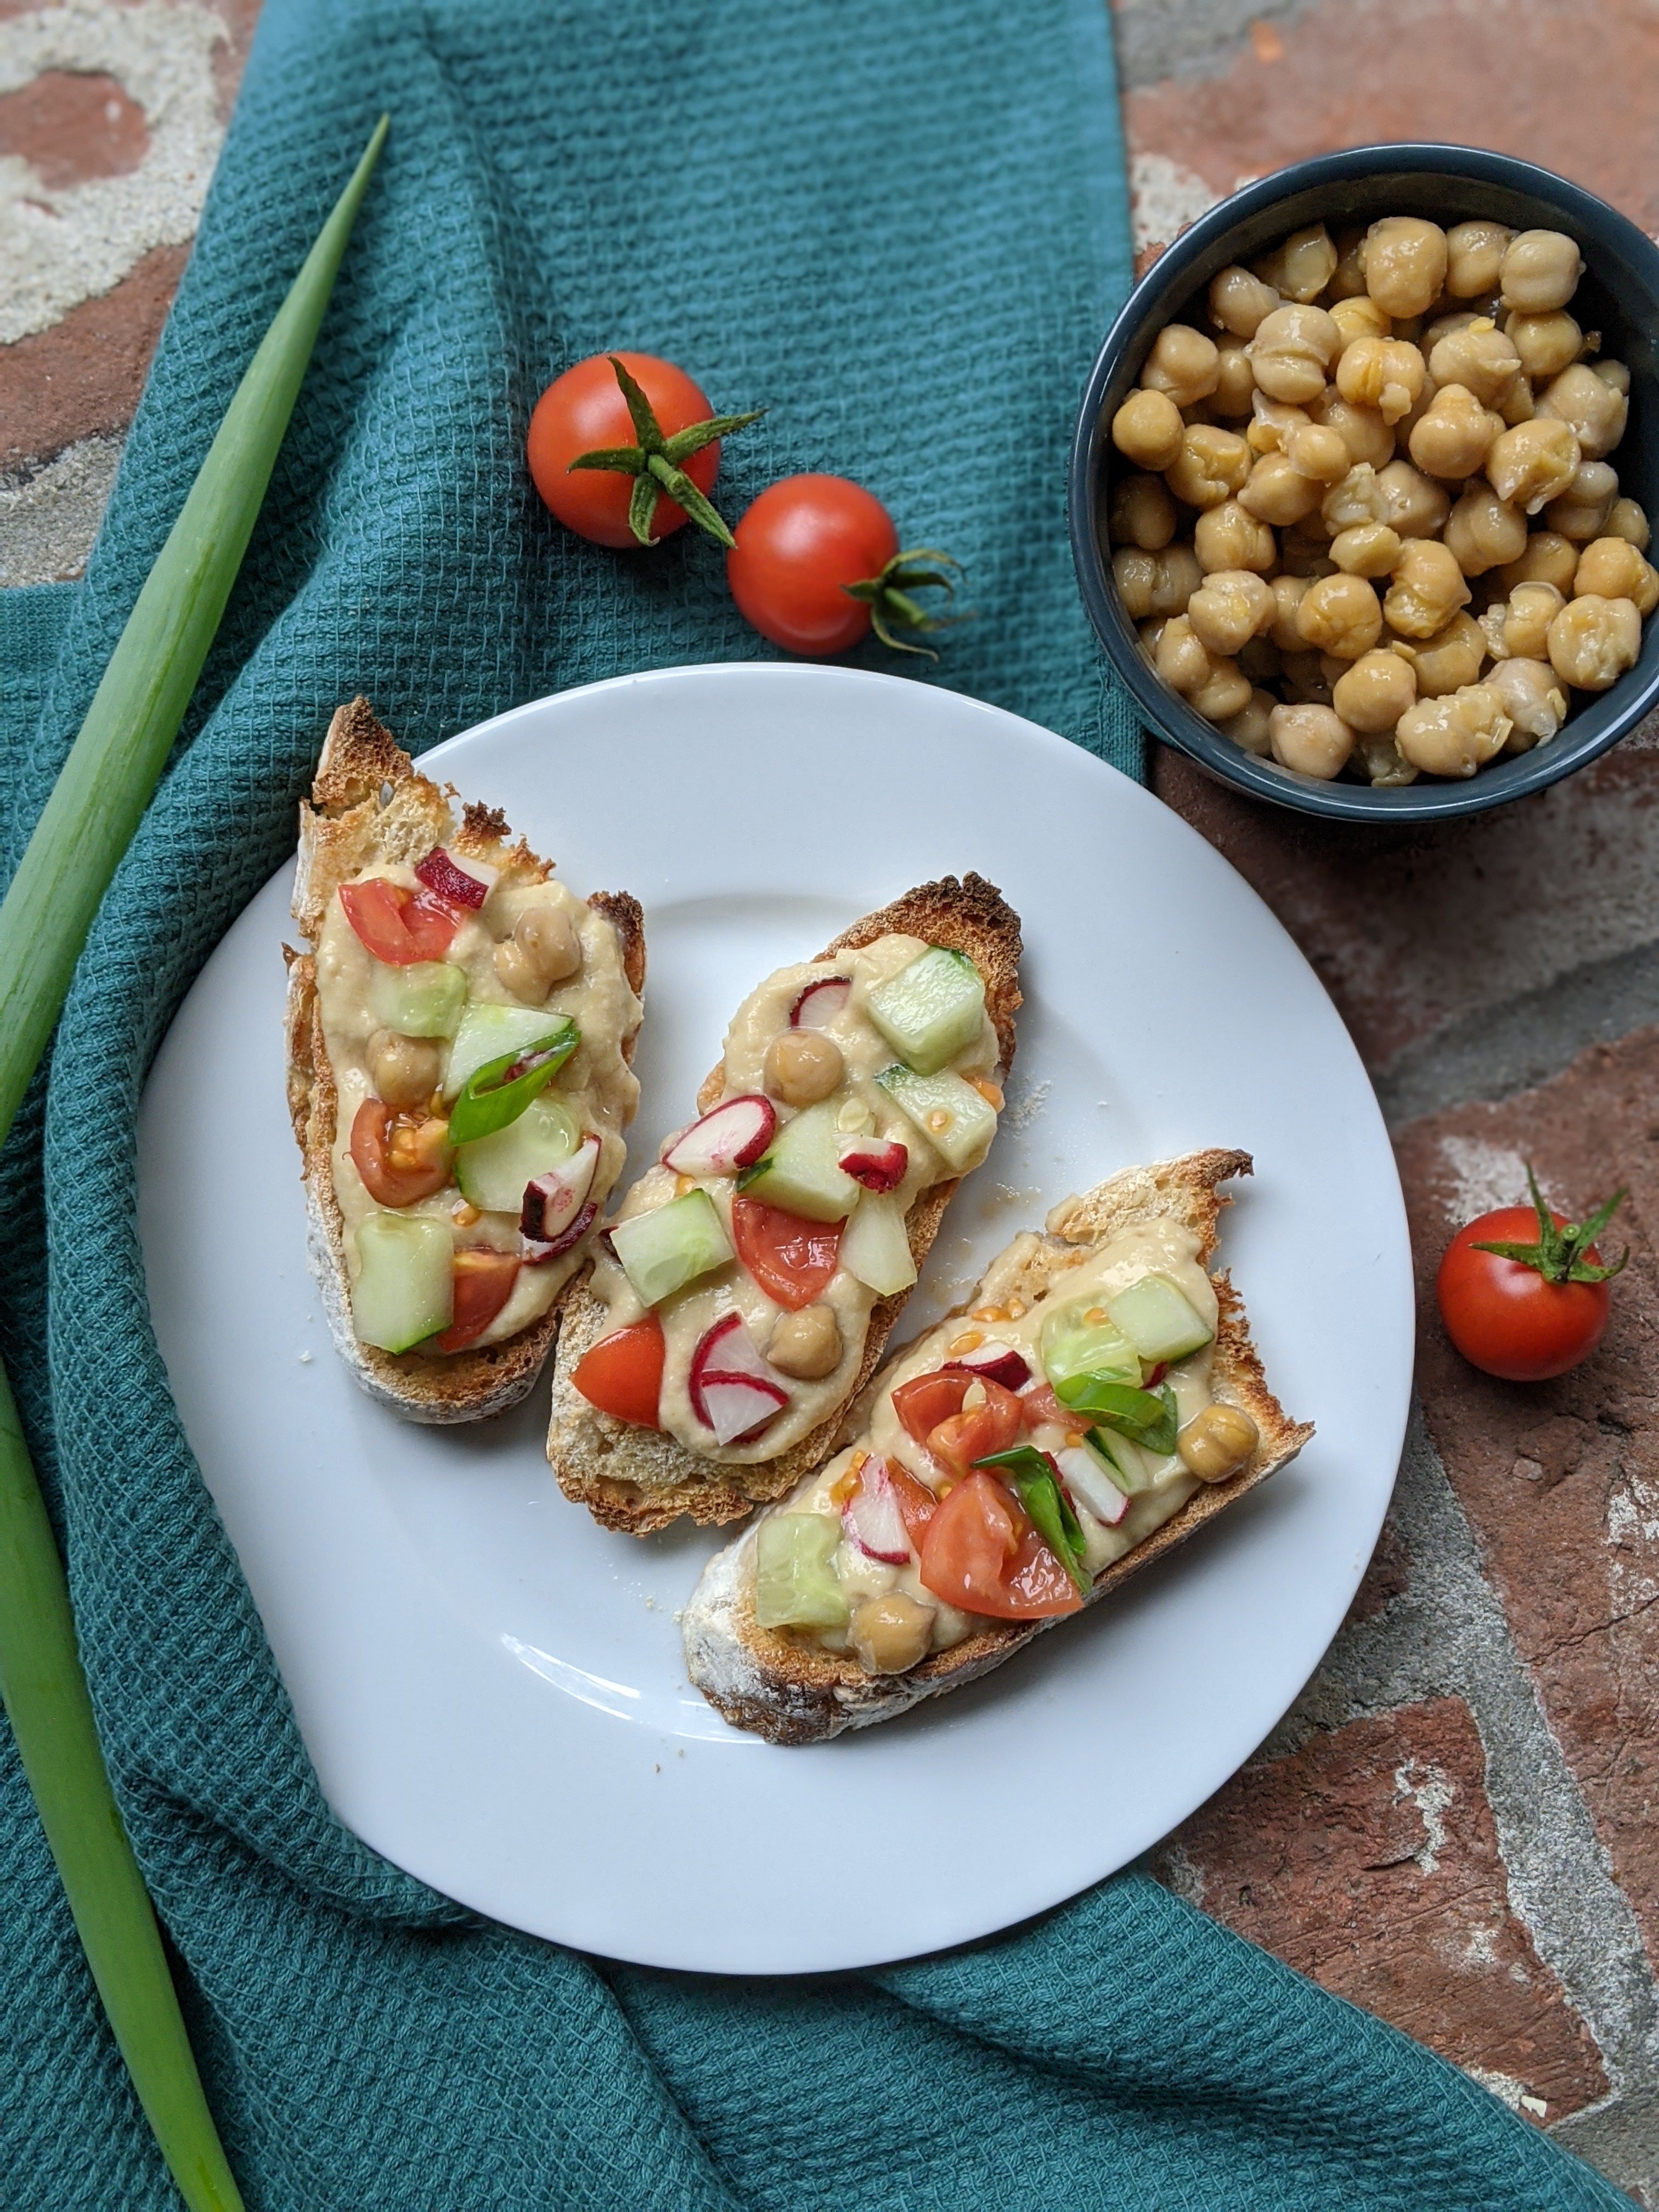 veggie toast recipe with fresh garden vegetables tomatoes chickpeas green onions cucumber recipes to use fresh tomatoes for breakfast snack healthy fresh snack ideas